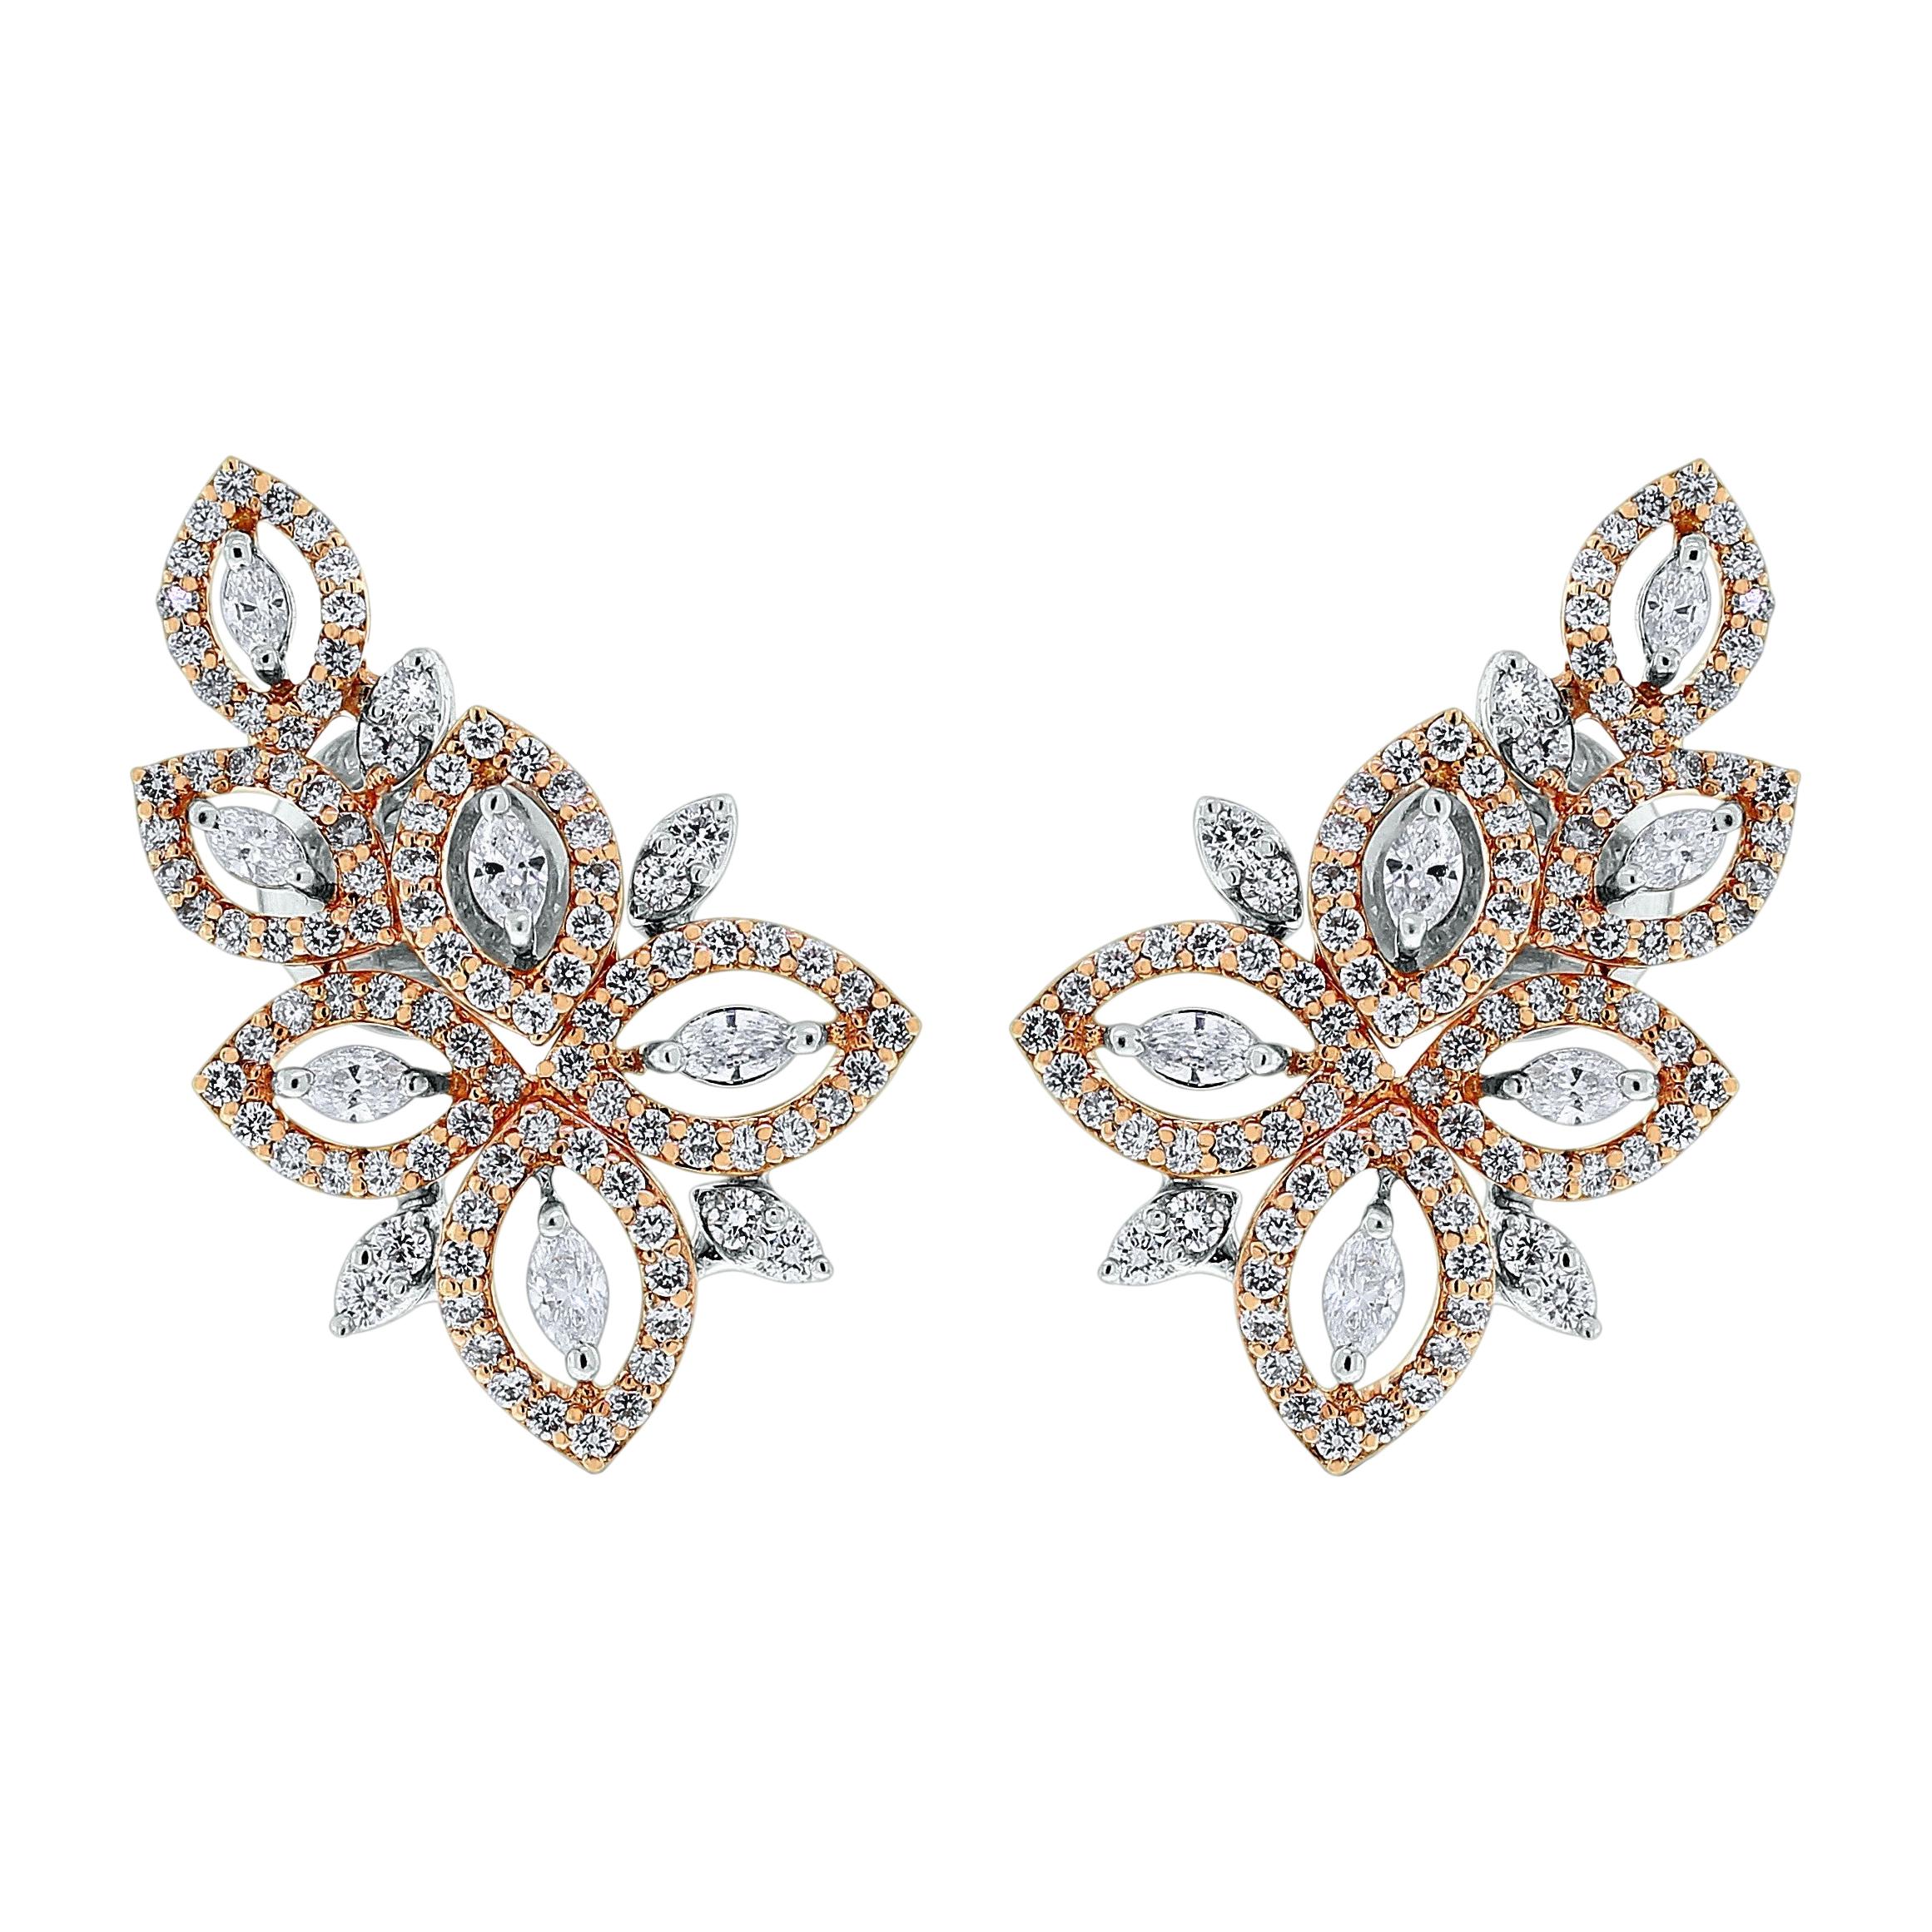 Beauvince Diamond Earrings and Climbers in Rose and White Gold